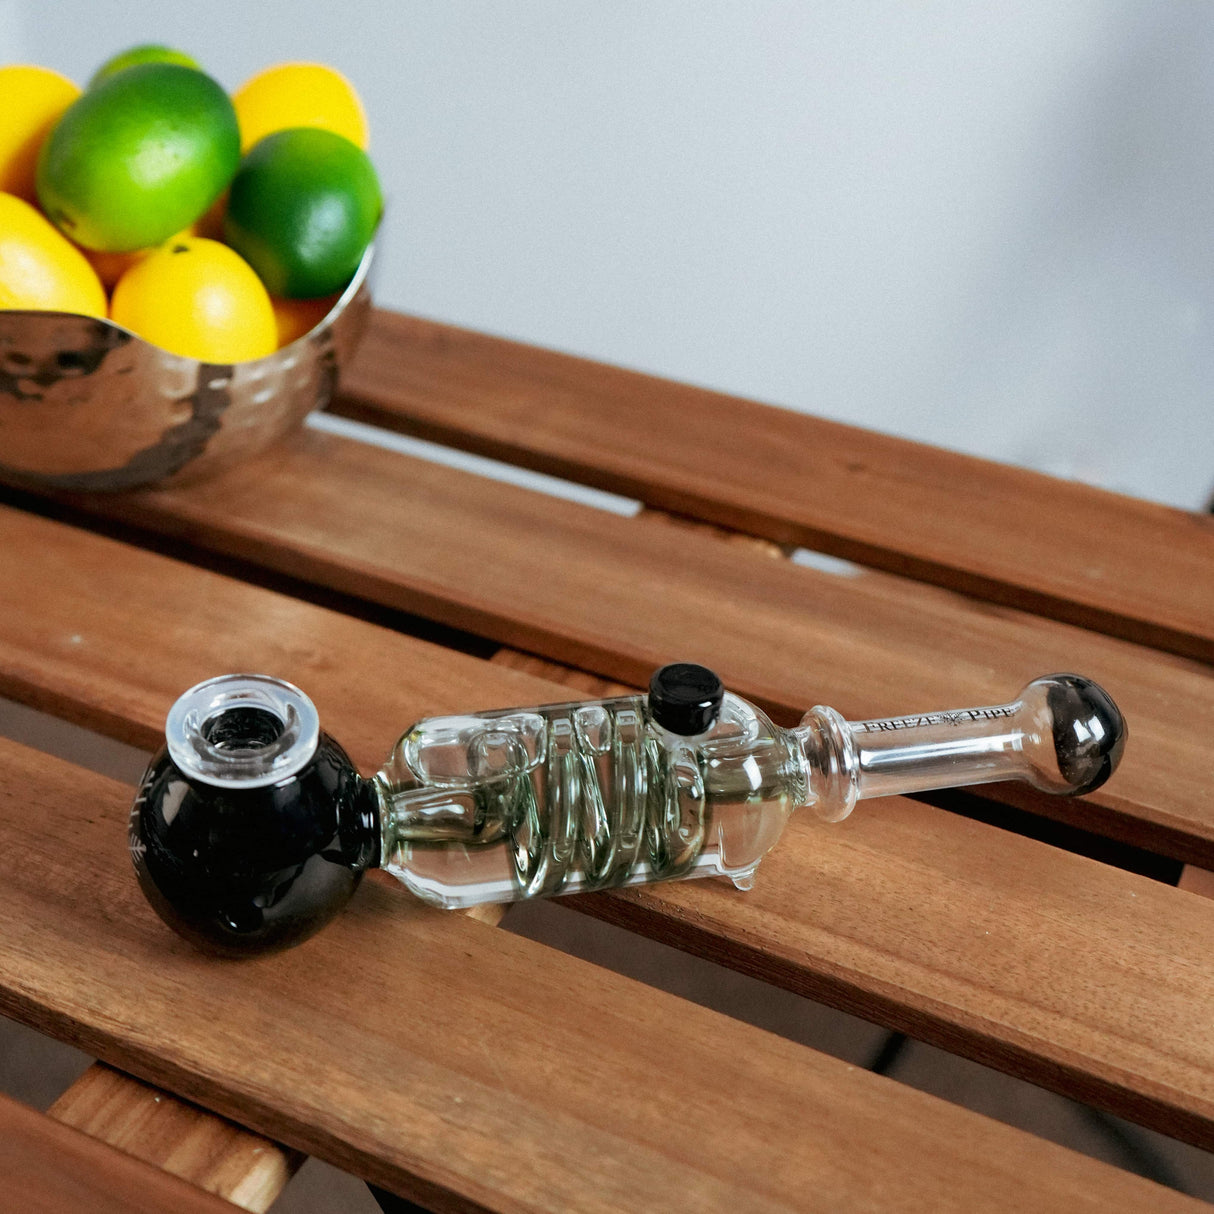 Freeze Pipe hand pipe in black and clear borosilicate glass, portable design, on wooden surface